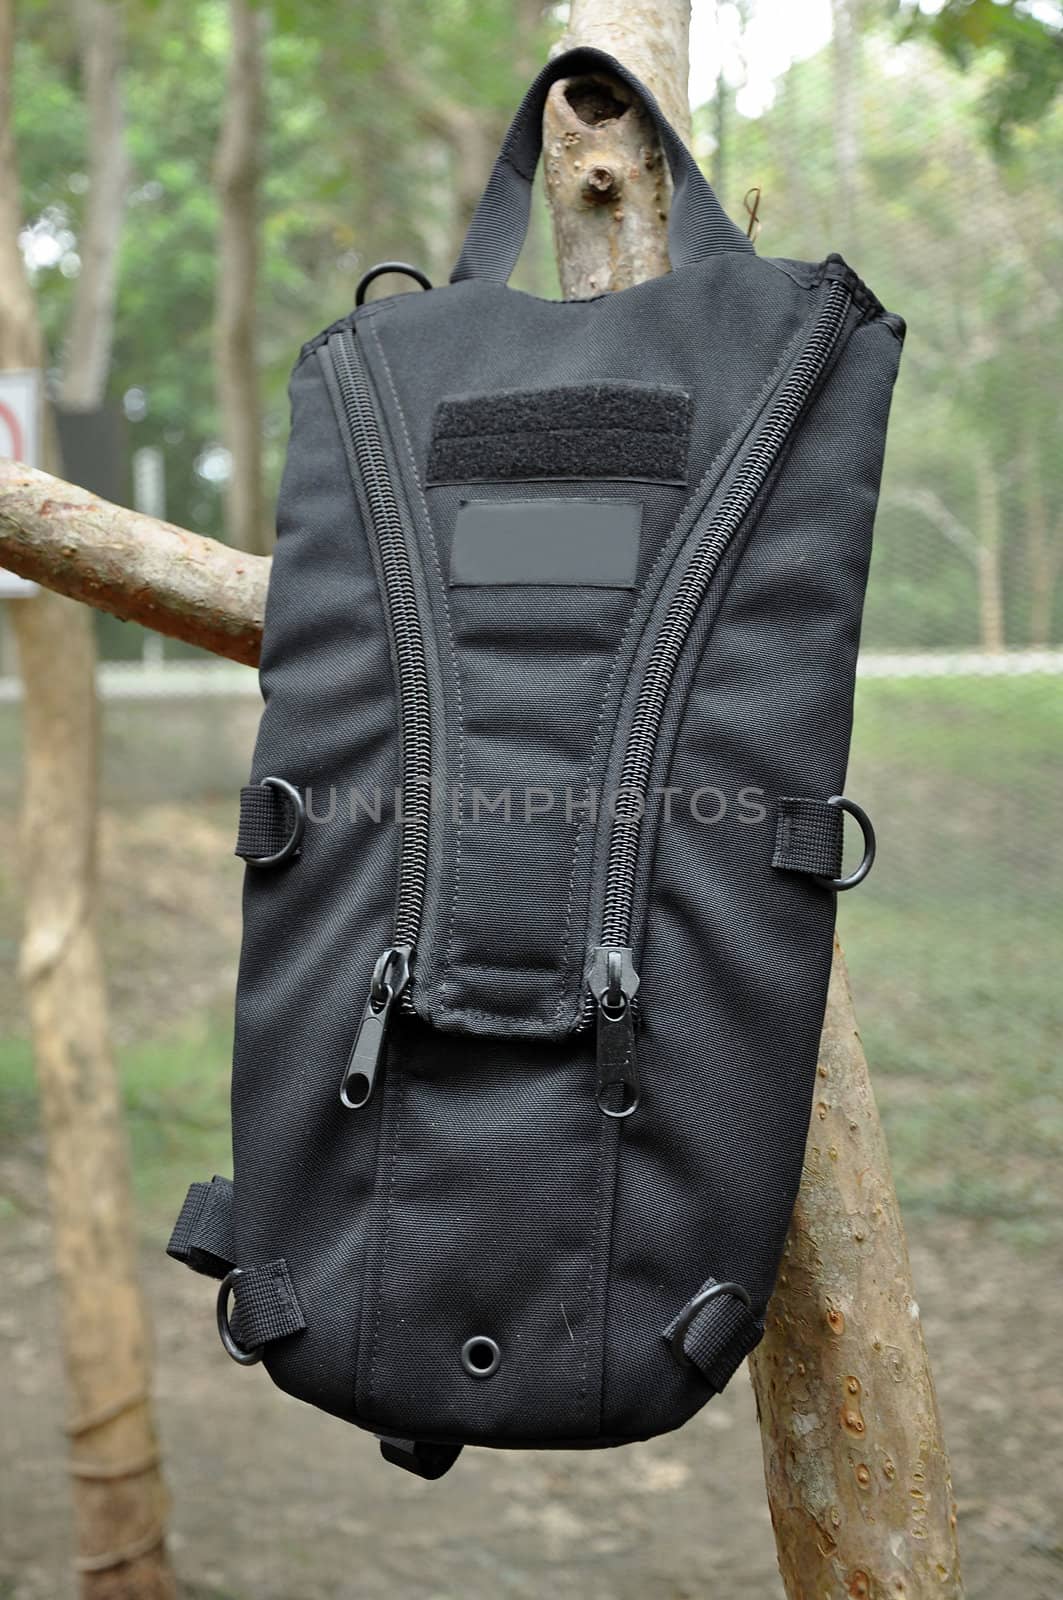 The Camelback hydration system or camel bag is backpack containing drinking water.